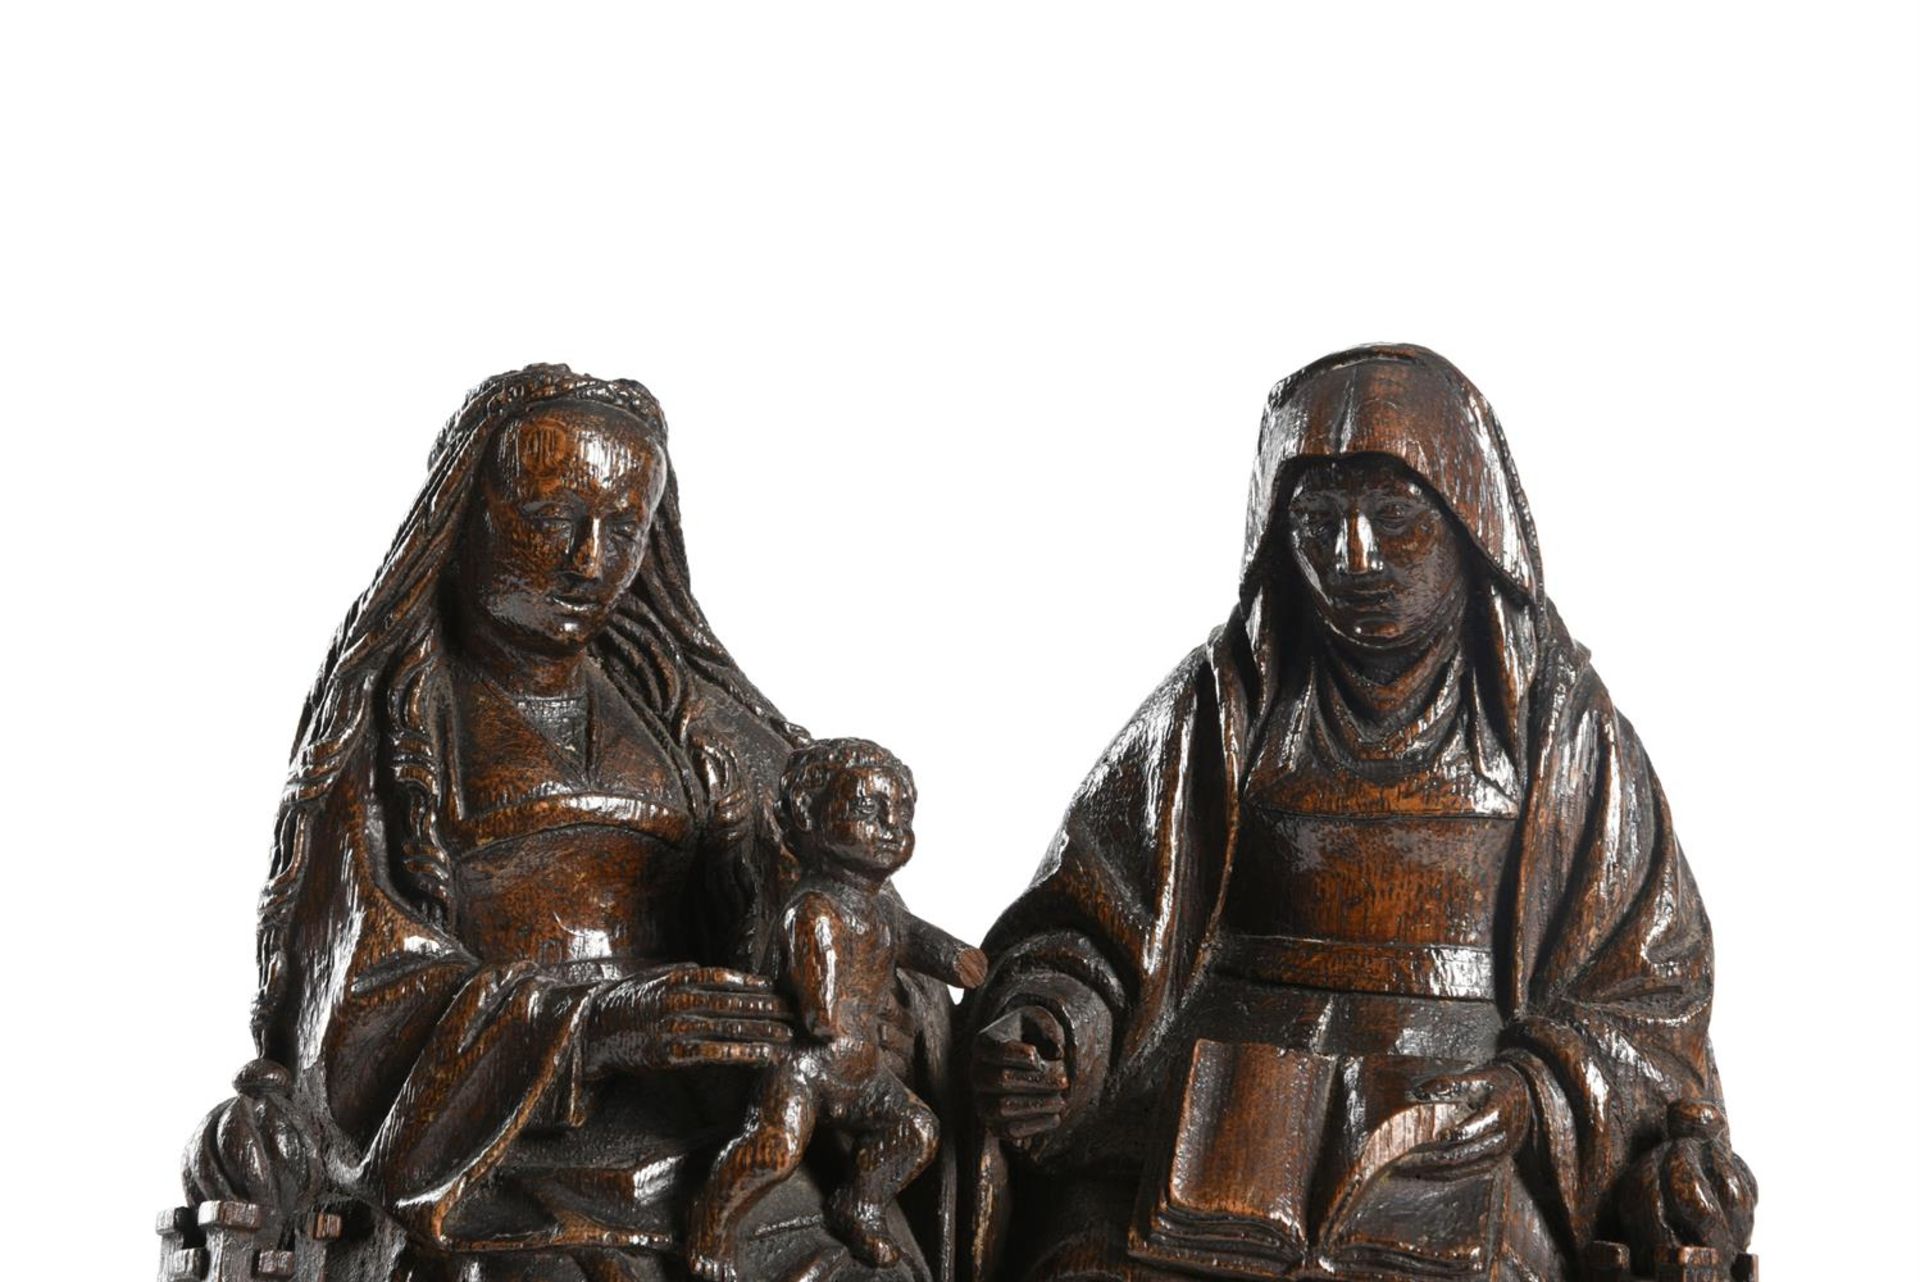 A CARVED OAK GROUP OF THE VIRGIN AND CHILD WITH SAINT ANNE 'ANNA SELBDRITT', ANTWERP - Image 2 of 4